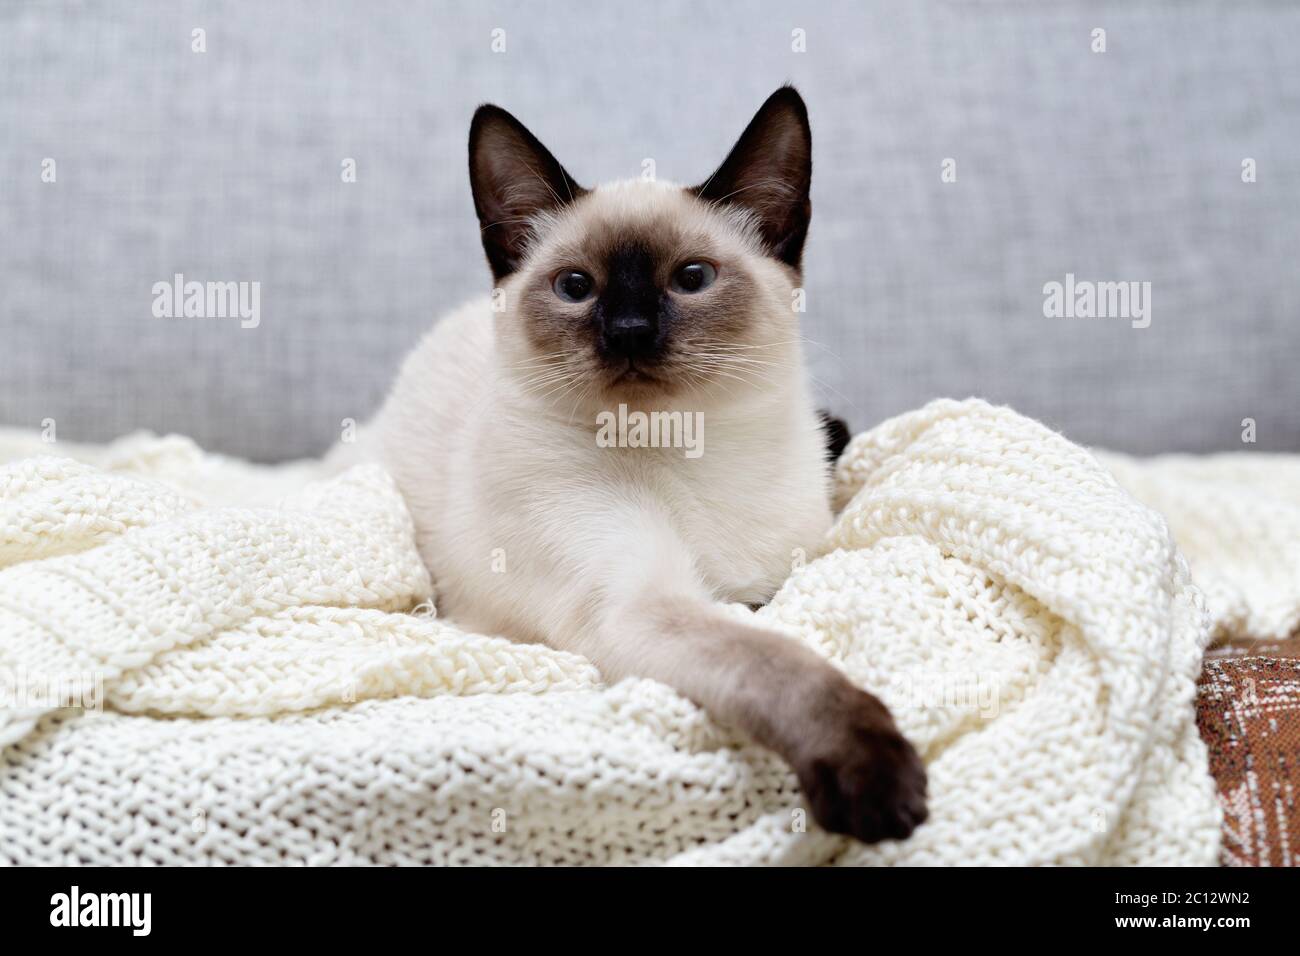 The cat is lying on the couch and funny stuck out the tip of his tongue. Stock Photo